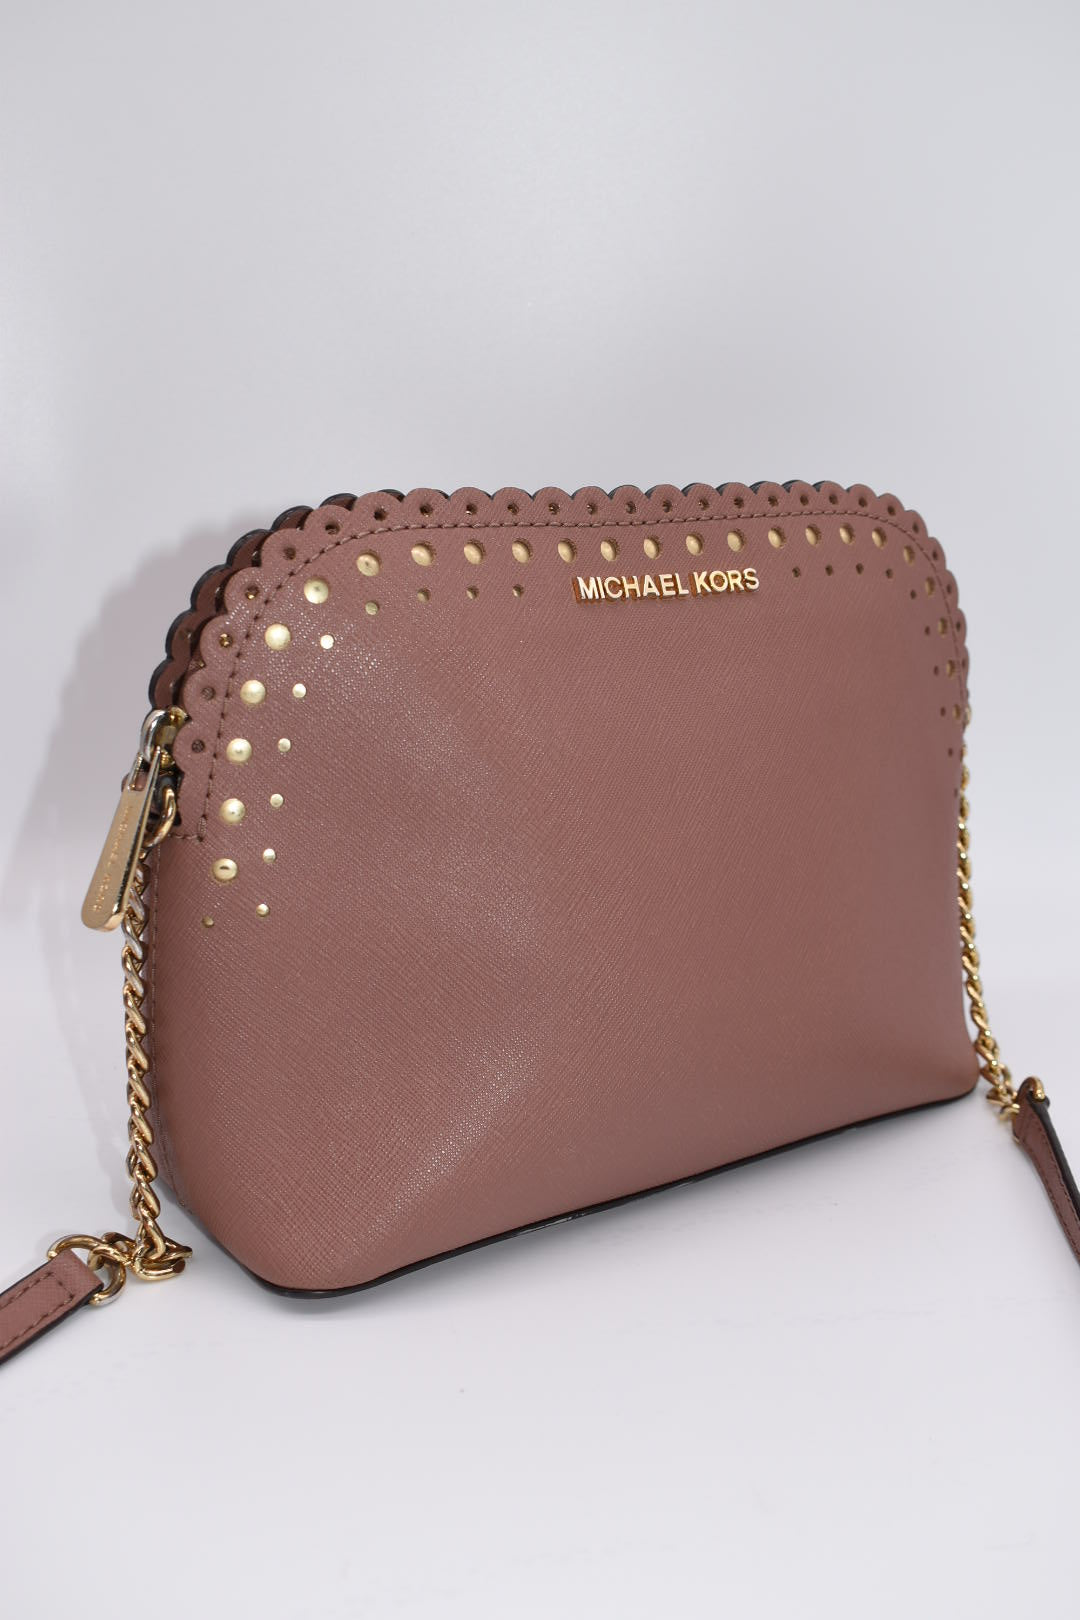 Michael Kors Cindy Saffiano Dome Crossbody Bag in Dusty Pink